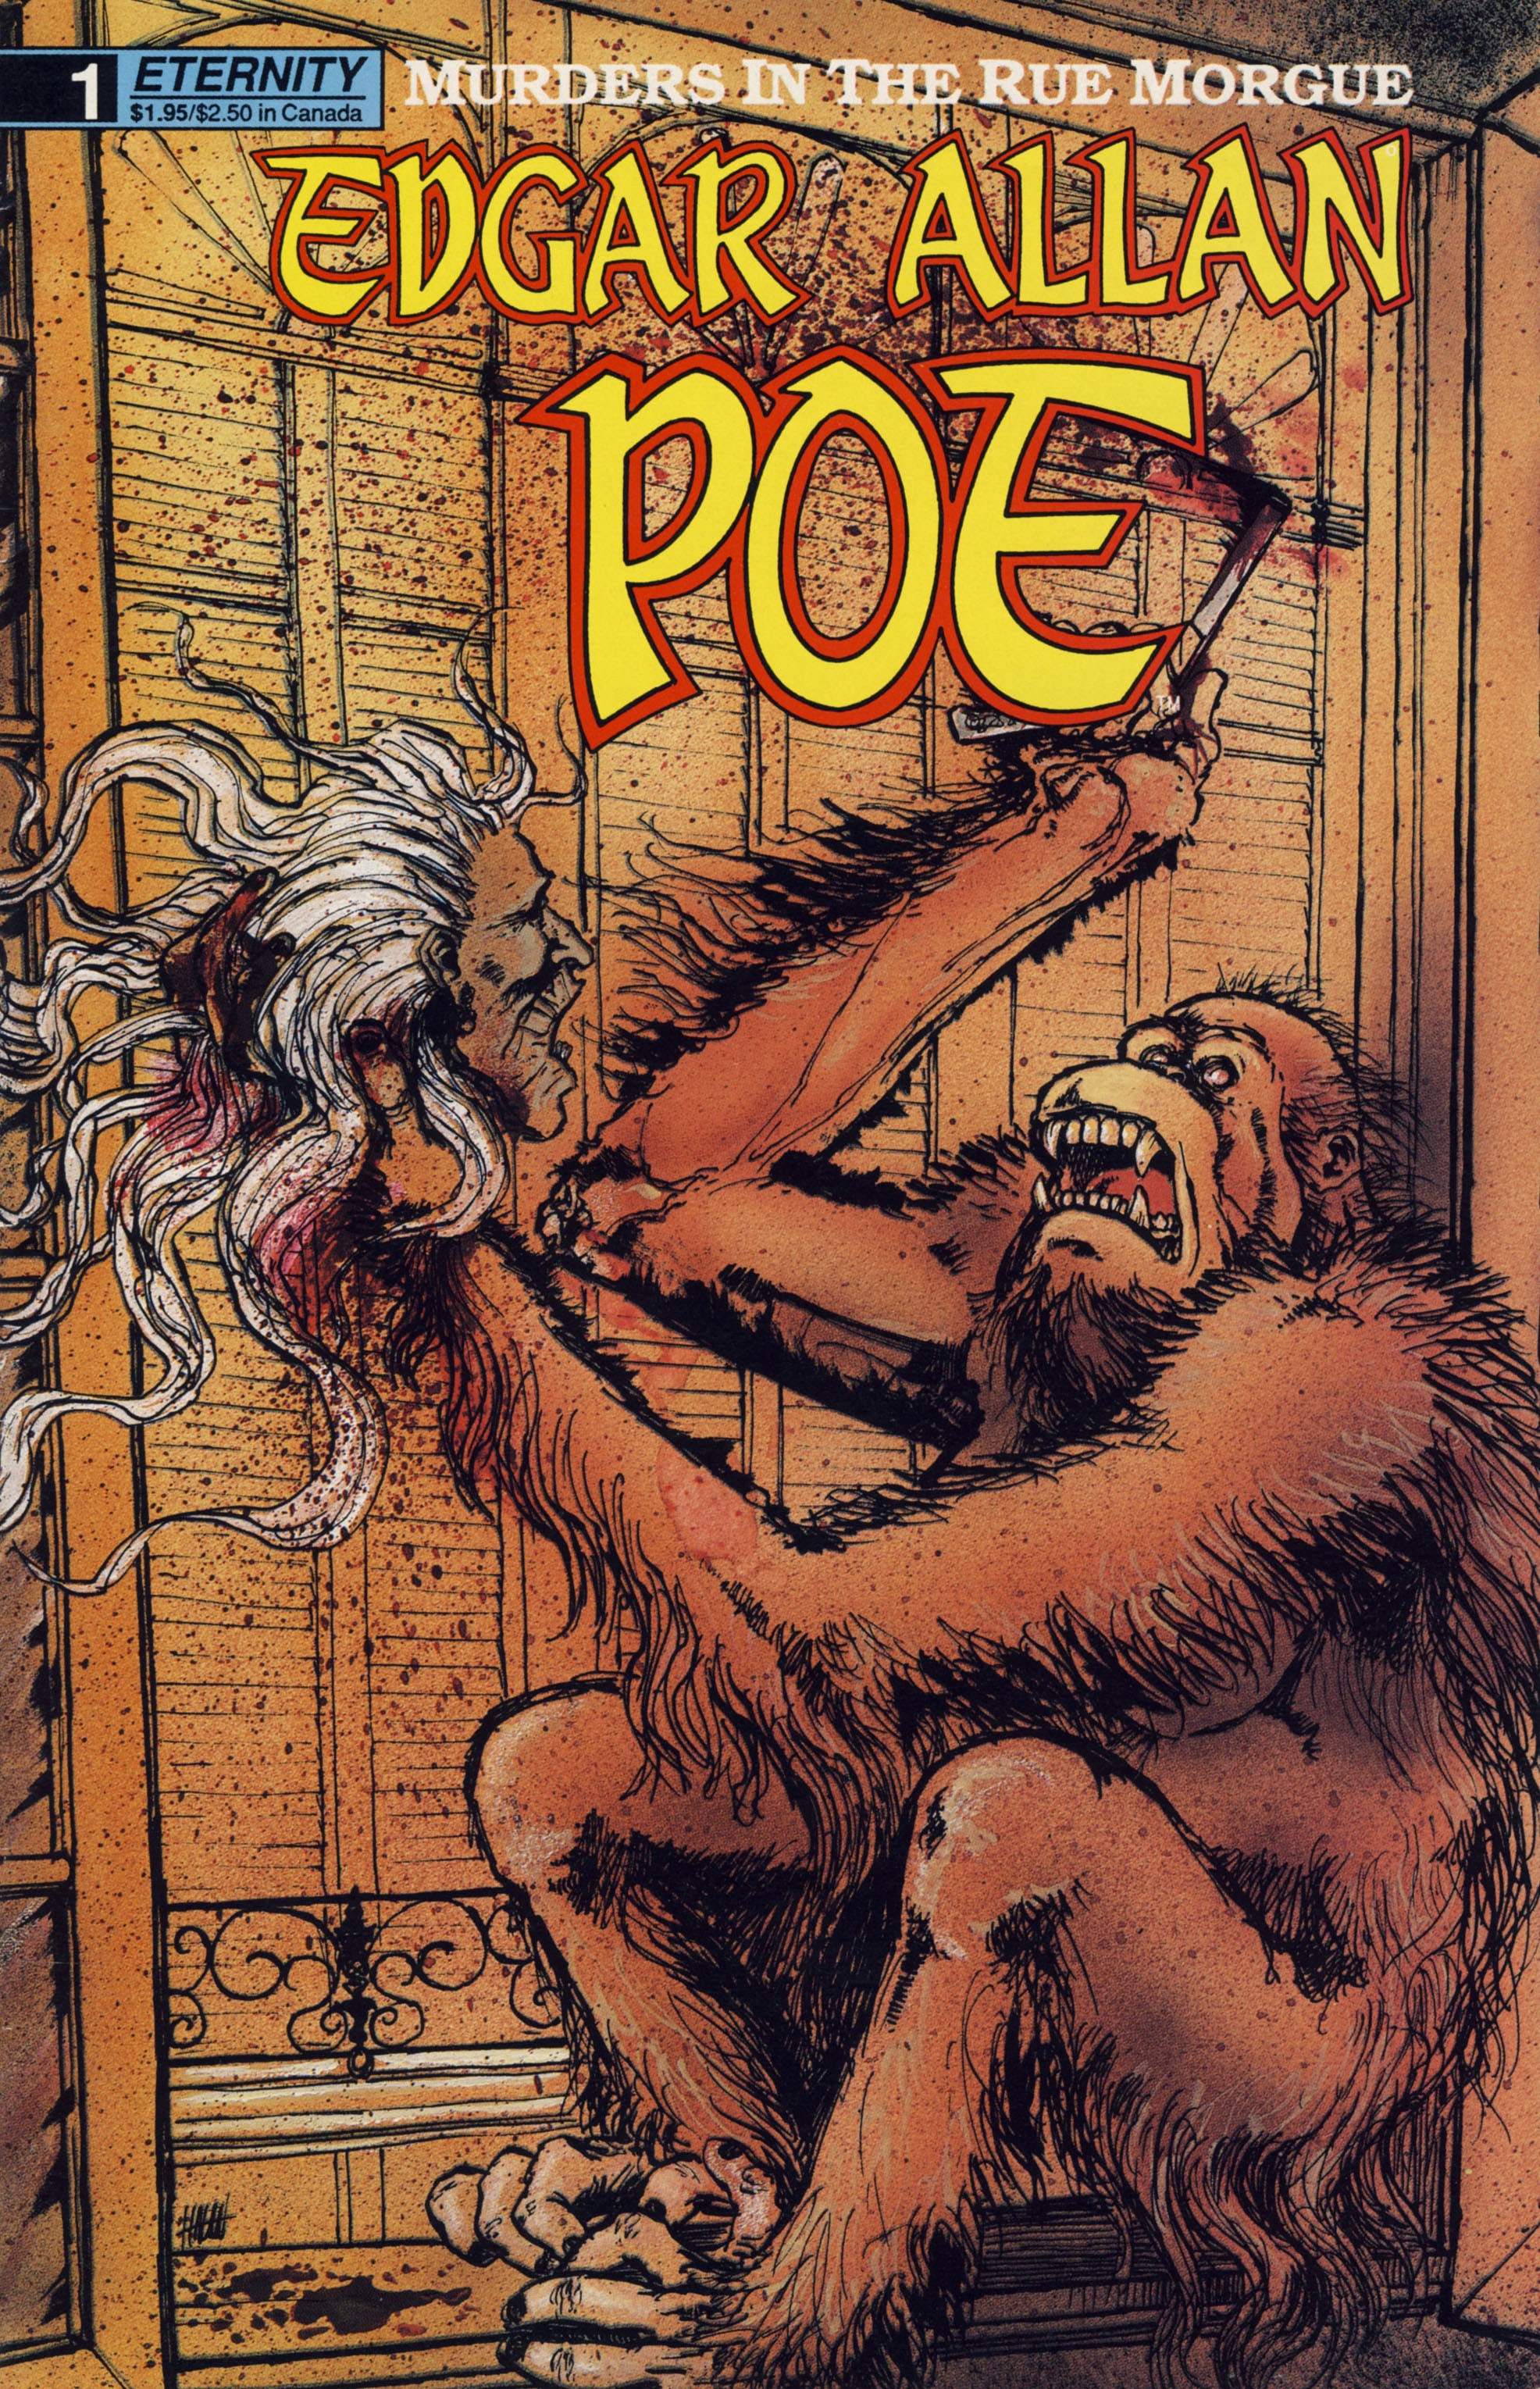 Read online Edgar Allan Poe: The Murders in the Rue Morgue and Other Stories comic -  Issue # Full - 1